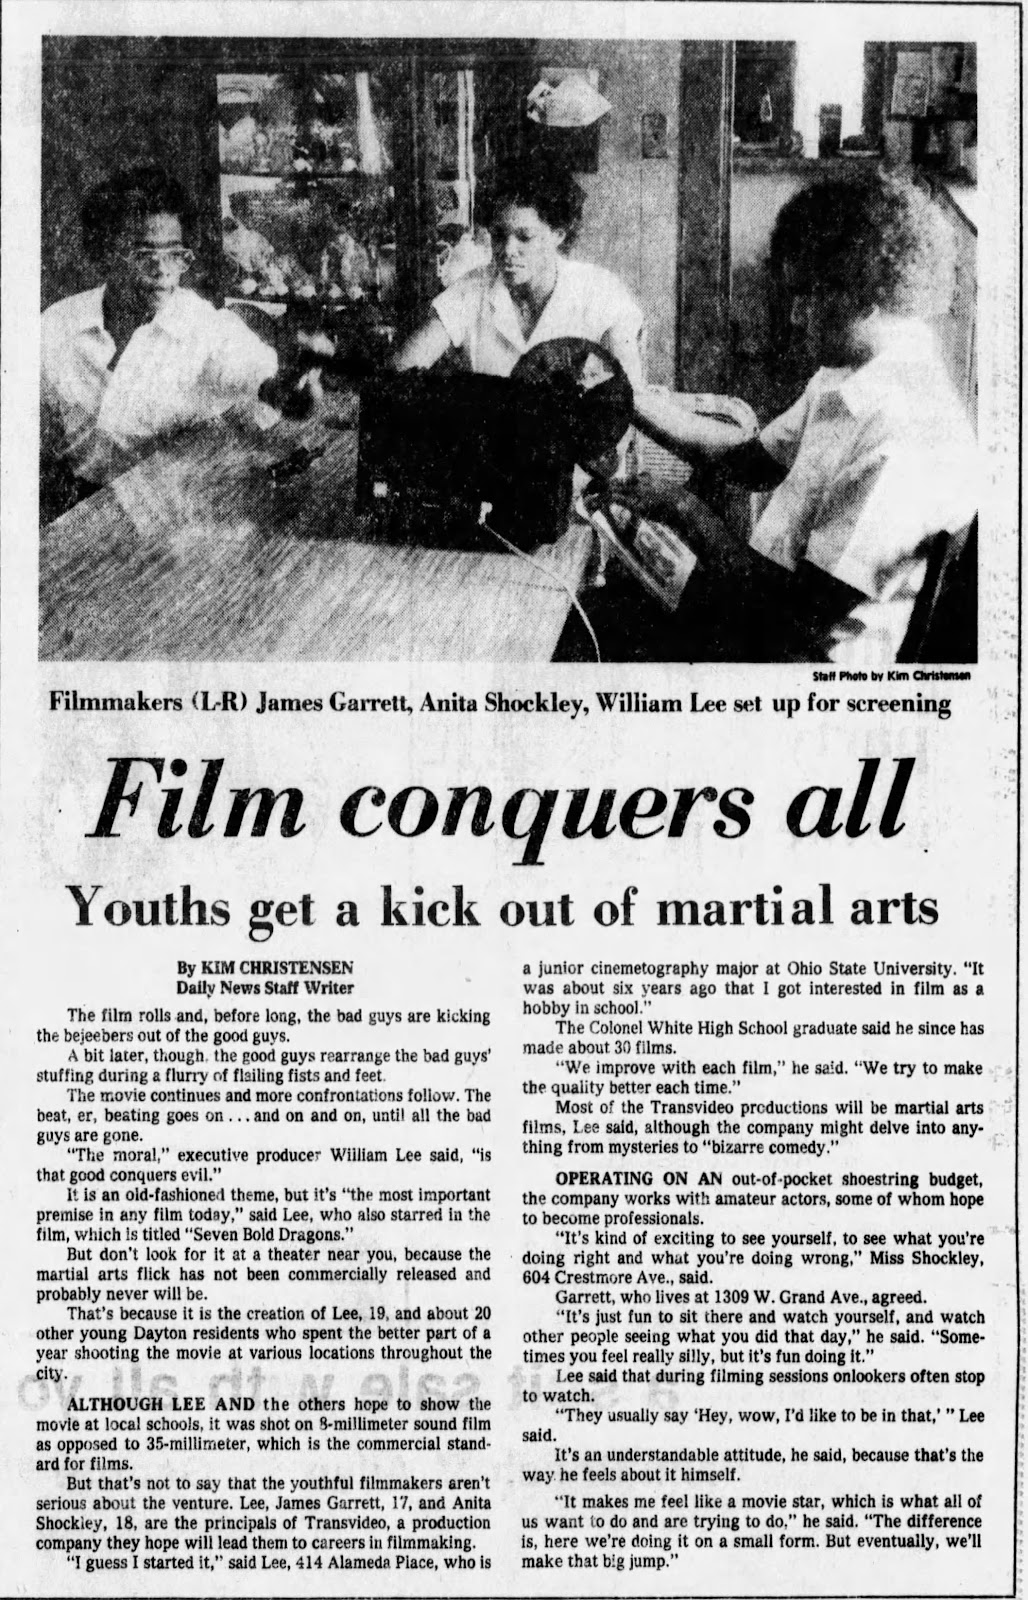 Film Conquers all - Youth get a kick out of martial arts - 70's newspaper article by Kim Christensen Daily News Staff Writer featuring William Lee, James Garrett and Anita Shockley